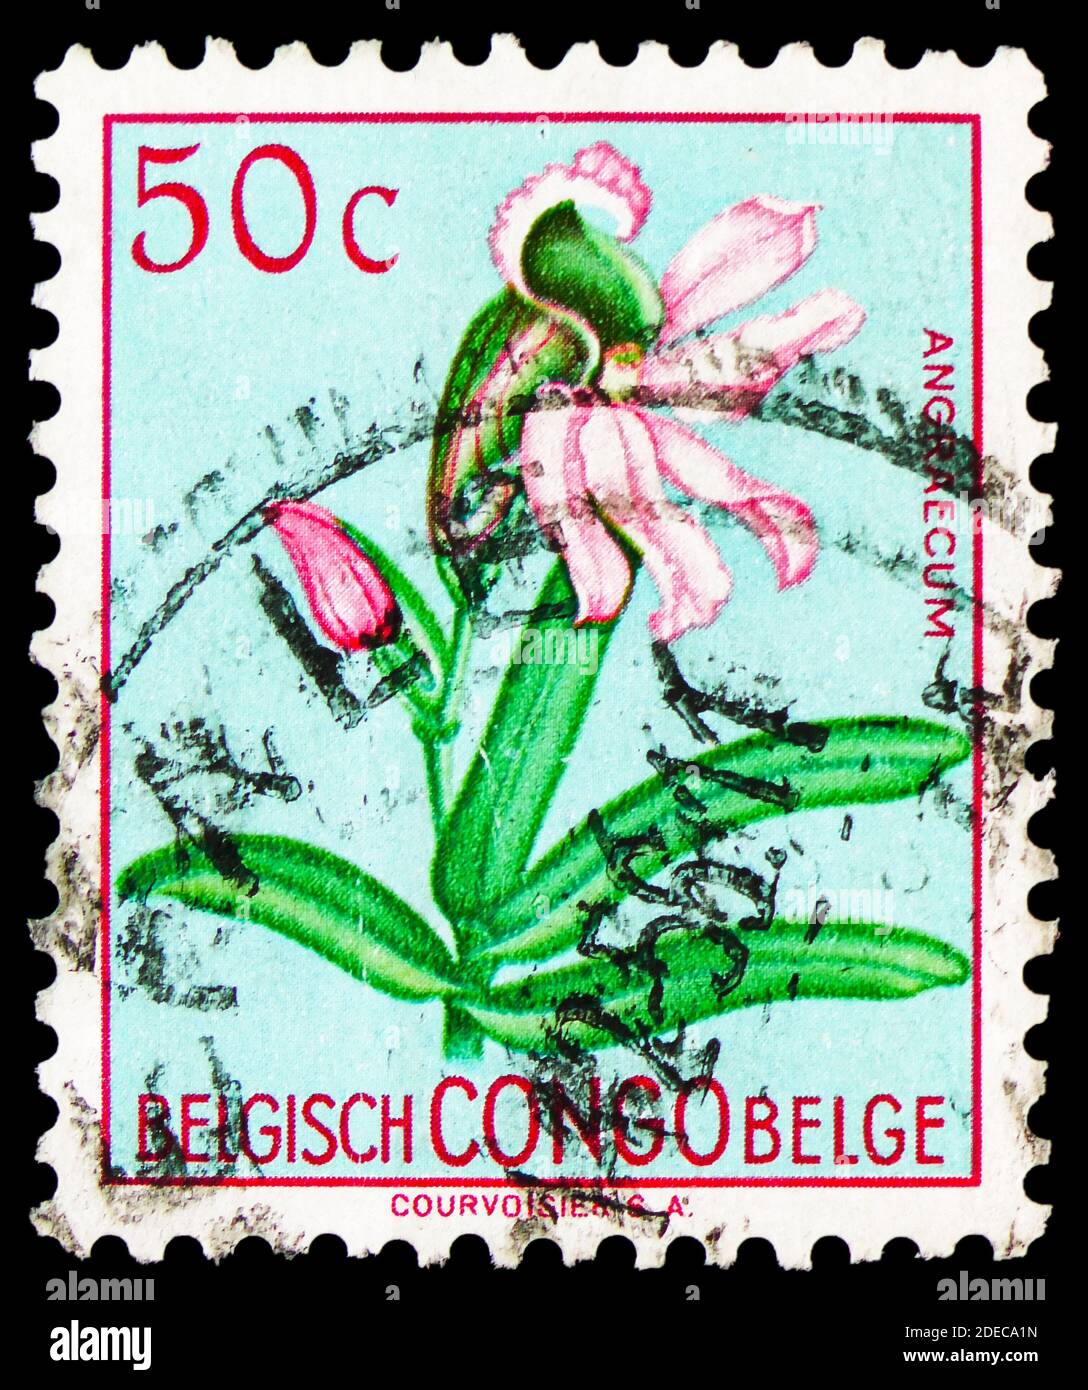 MOSCOW, RUSSIA - OCTOBER 17, 2020: Postage stamp printed in Belgish Congo shows Eurychone galeandrae (syn.Angraecum galeandrae), Flowers serie, circa Stock Photo